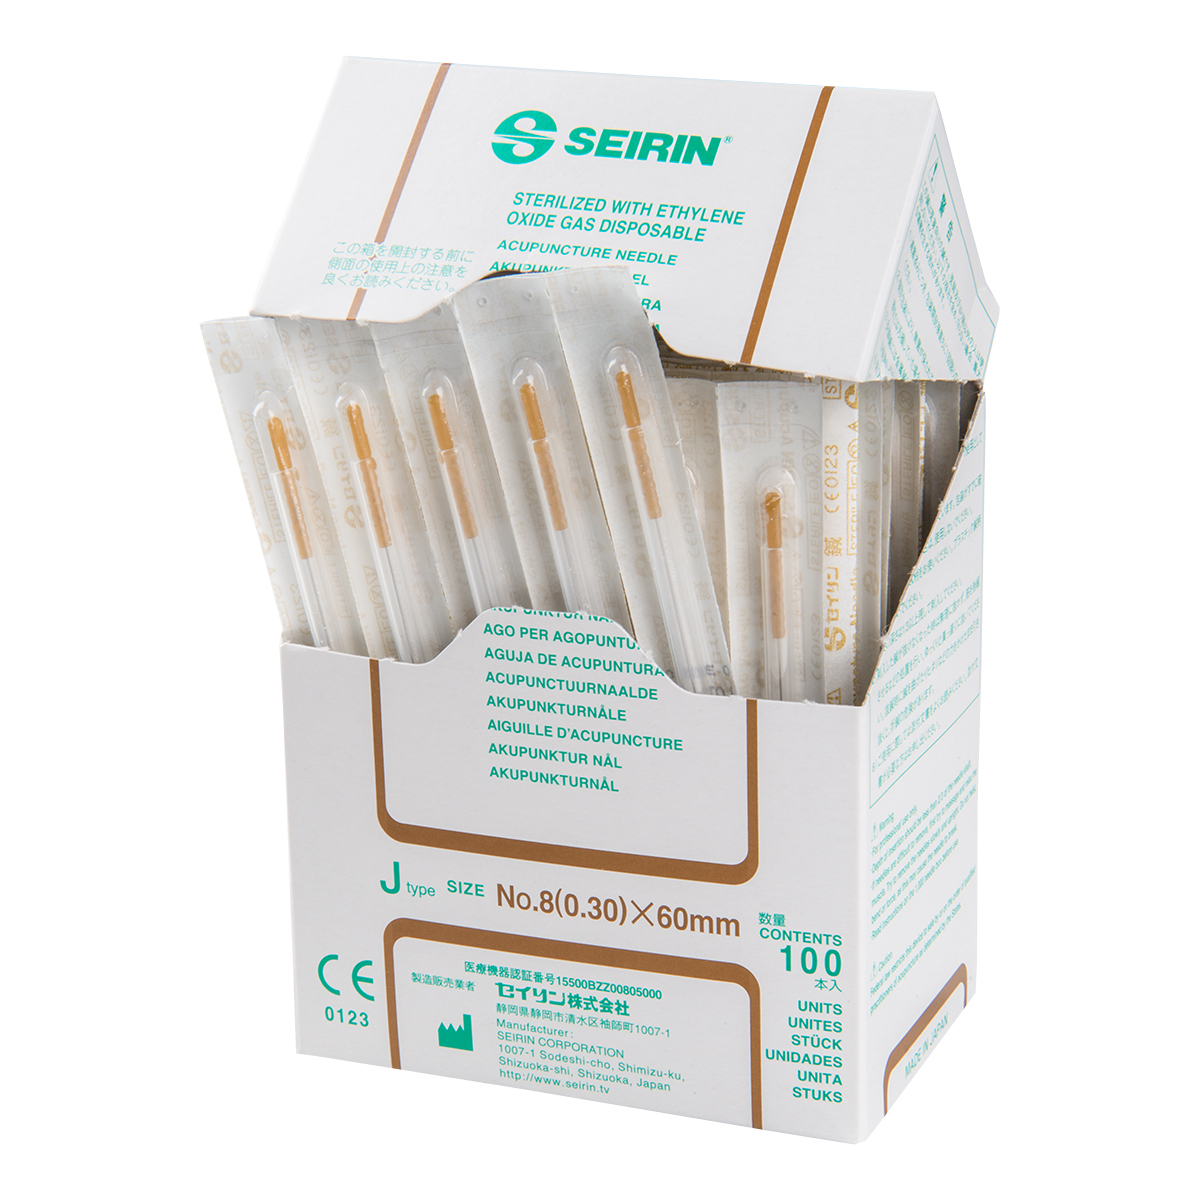 All SEIRIN Needles Are Tested to Stringent Safety Standards